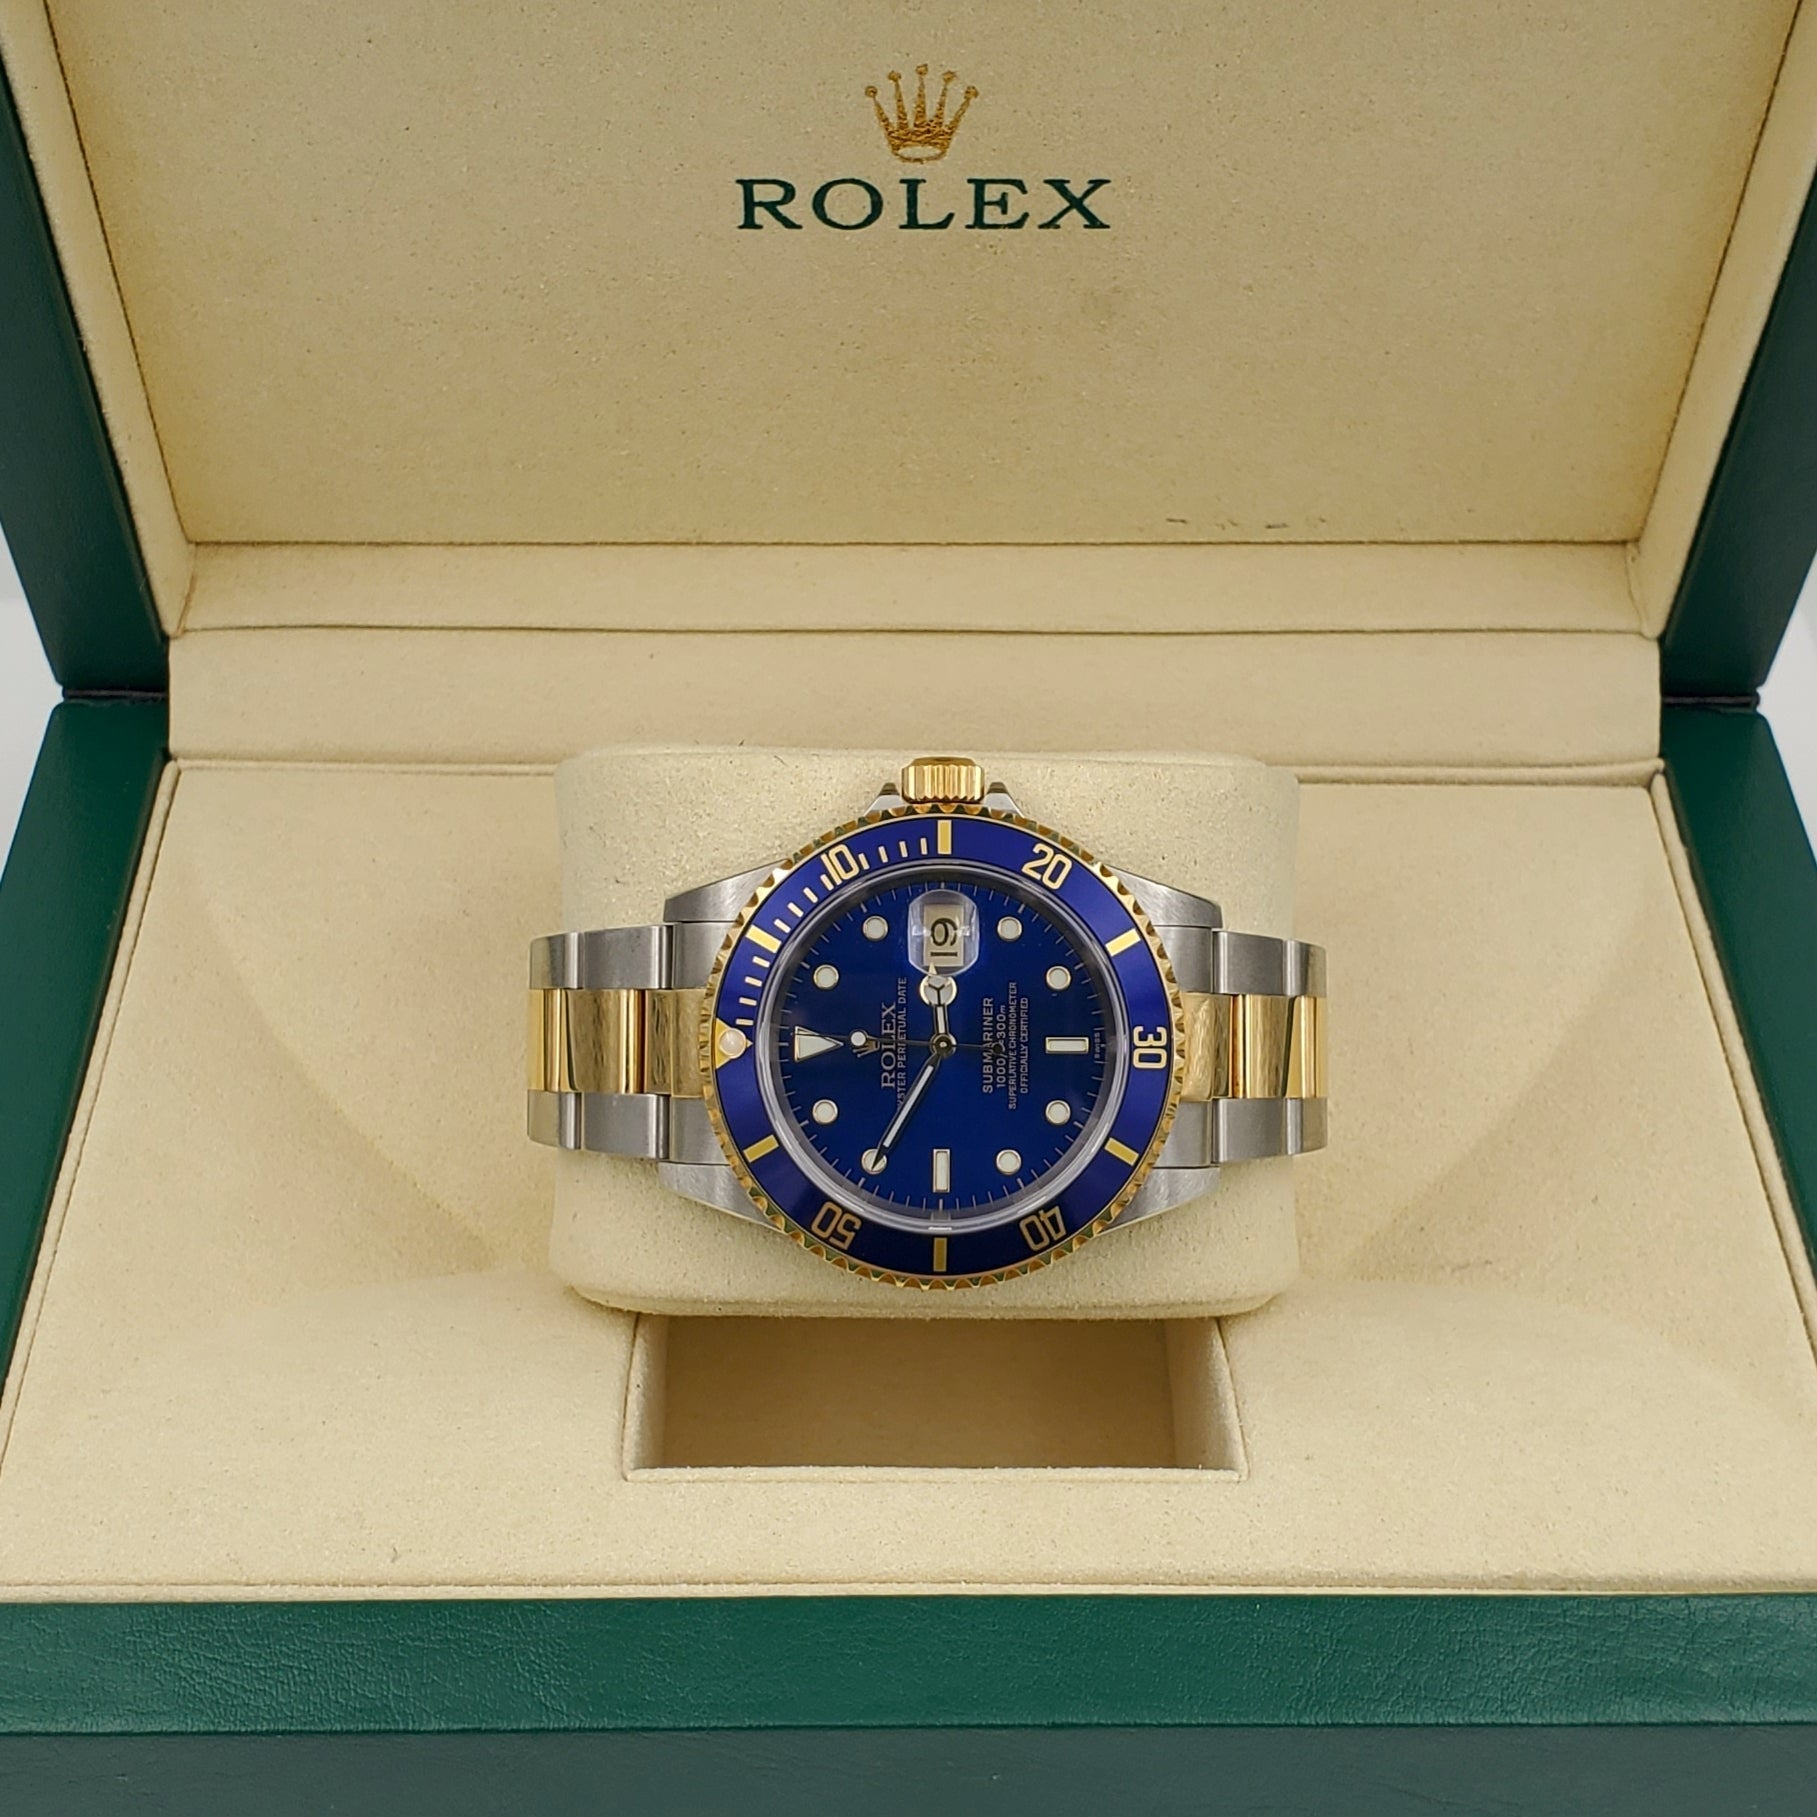 2007 Men's Rolex 40mm Submariner Oyster Perpetual Two Tone 18K Yellow Gold / Stainless Steel Watch with Blue Dial and Blue Bezel. (Pre-Owned 16613LN)